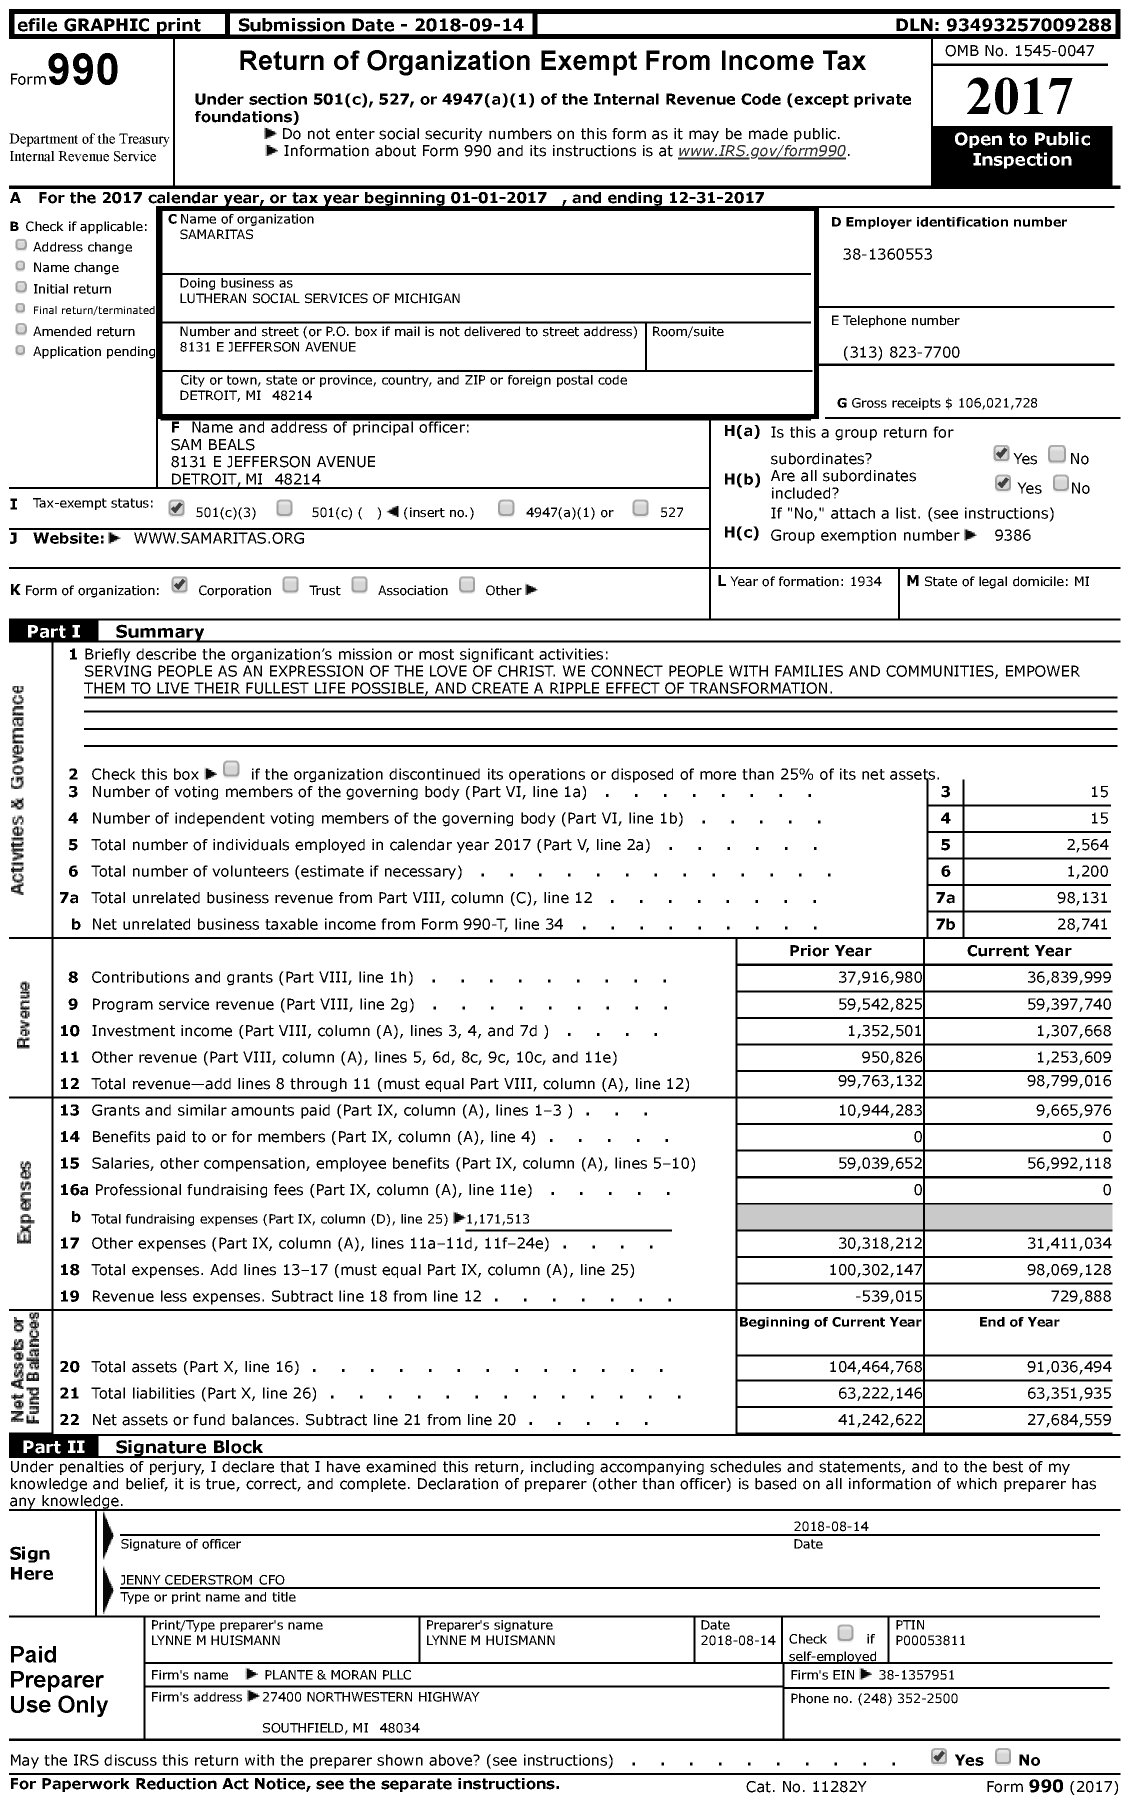 Image of first page of 2017 Form 990 for Lutheran Social Services of Michigan (LSSM)